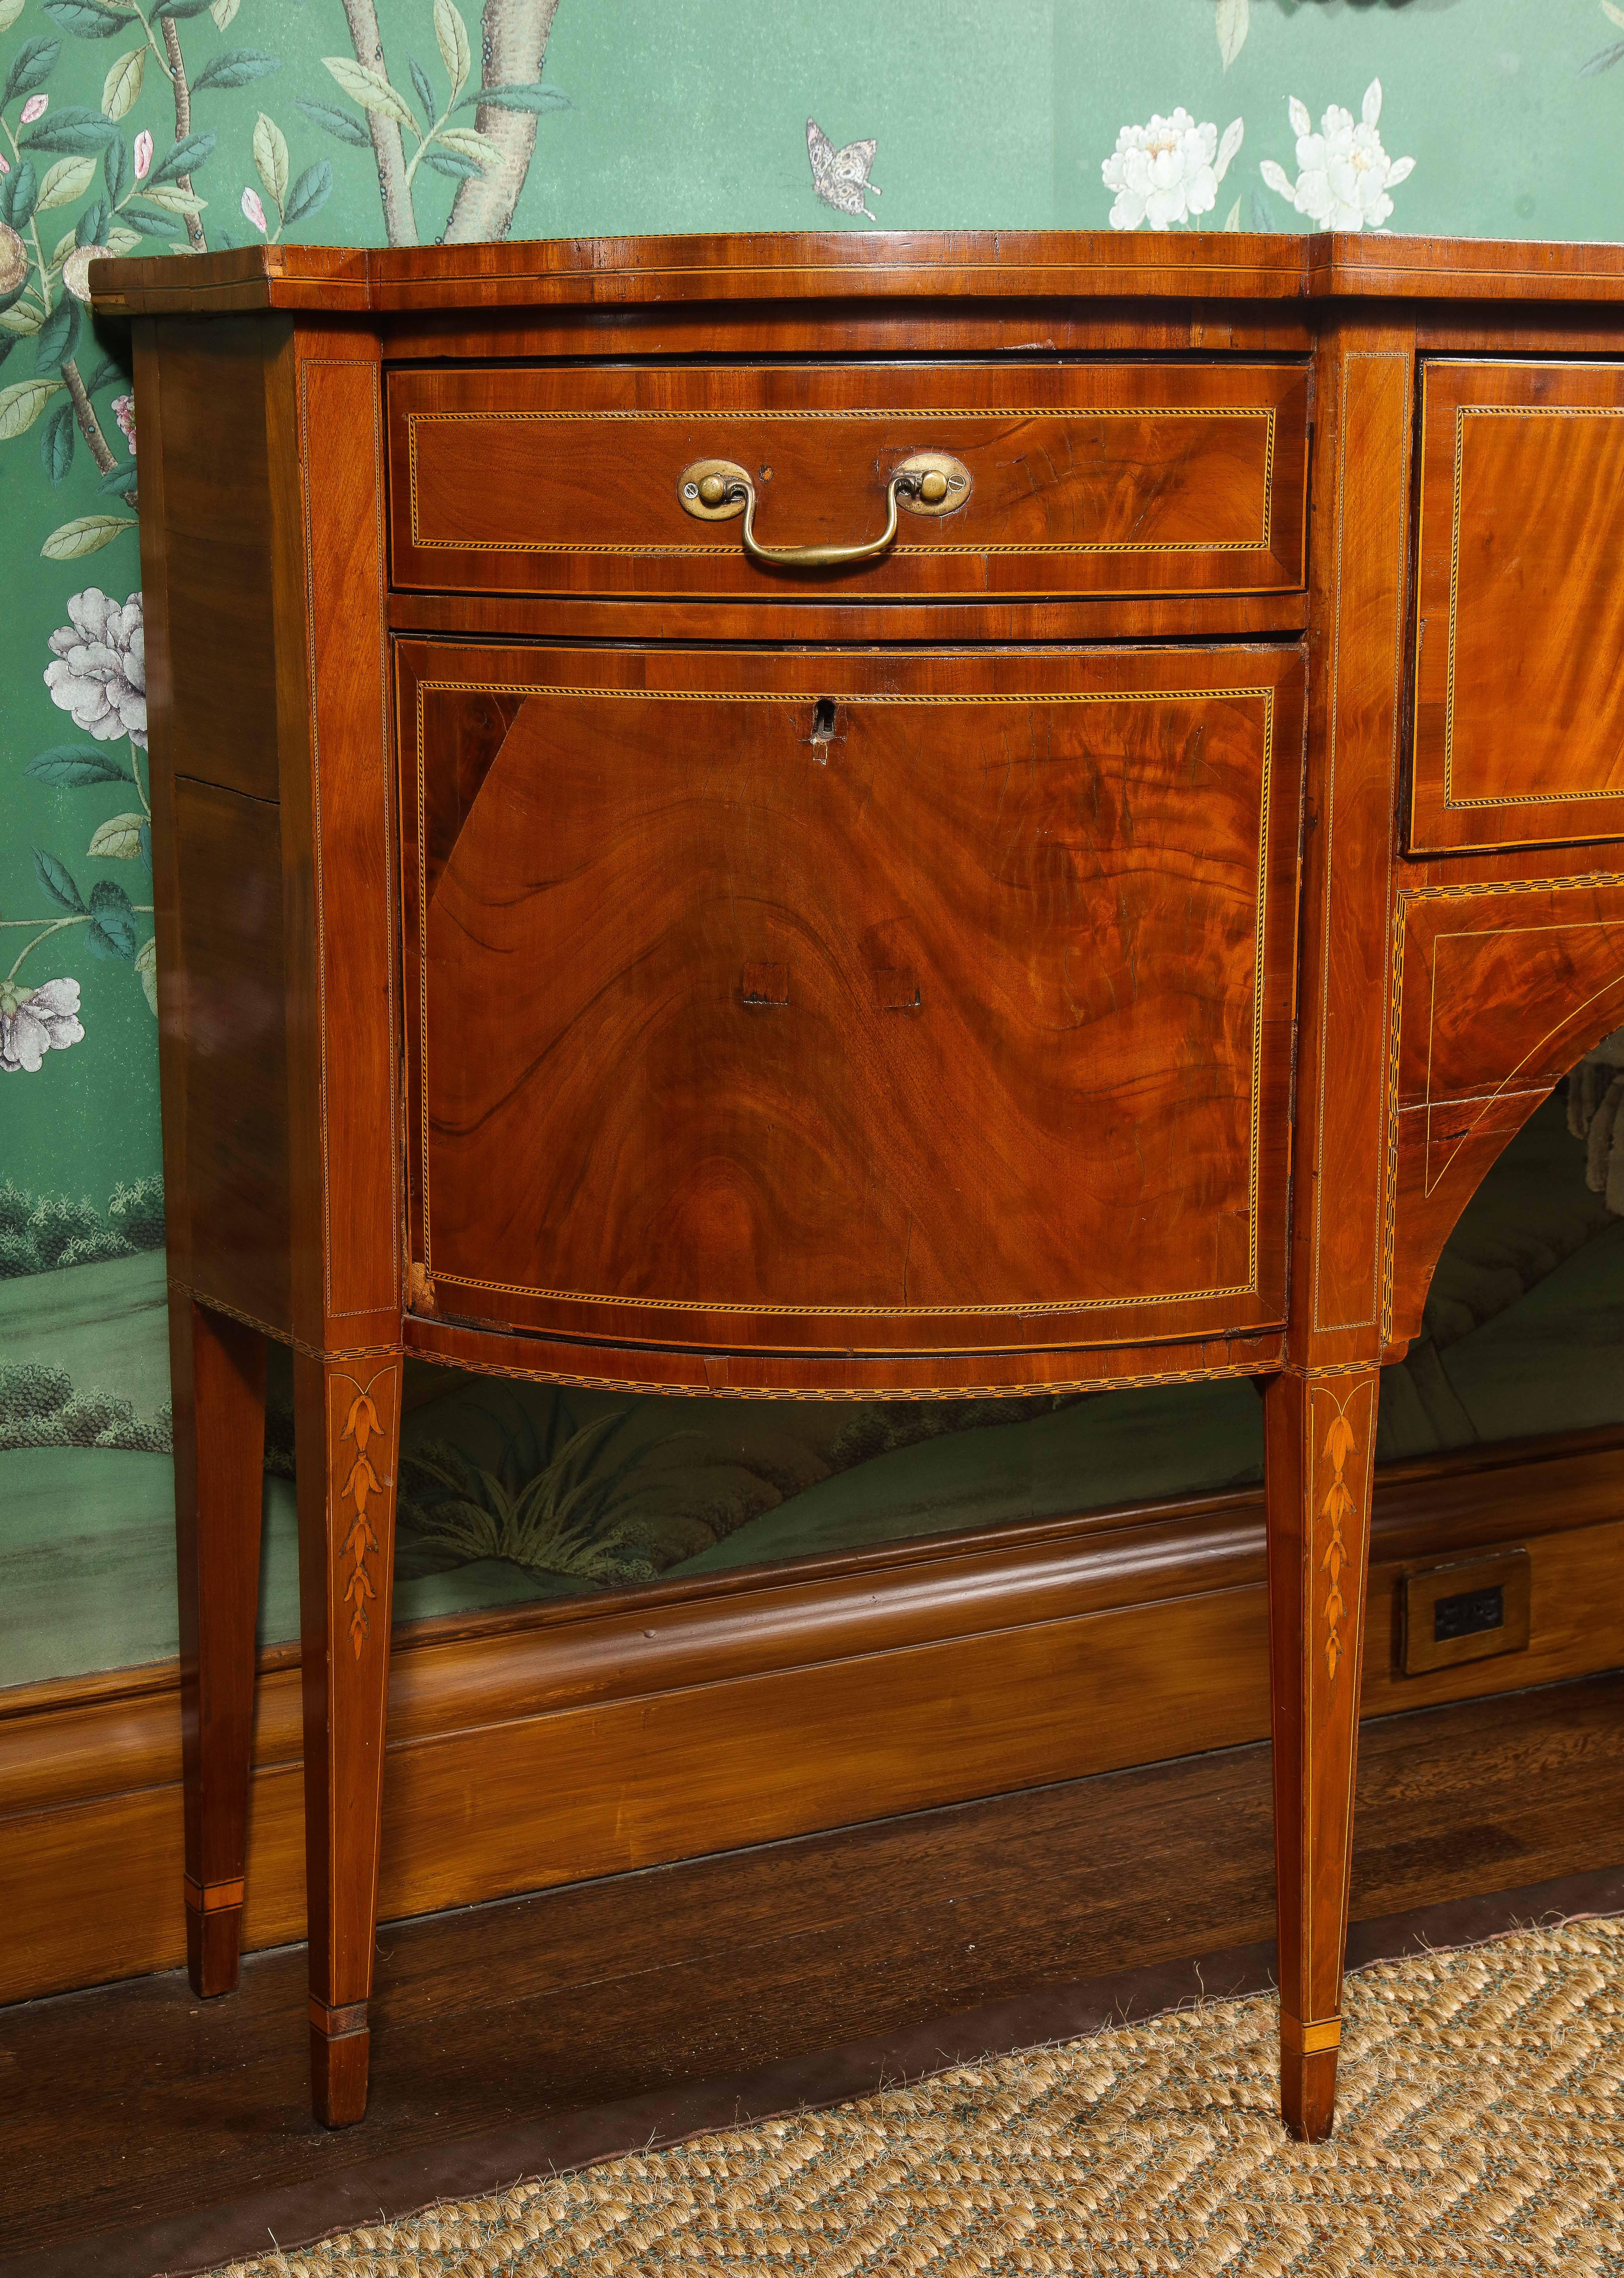 19th Century George III Style Parquetry Inlaid Bowfront Mahogany Buffet For Sale 9